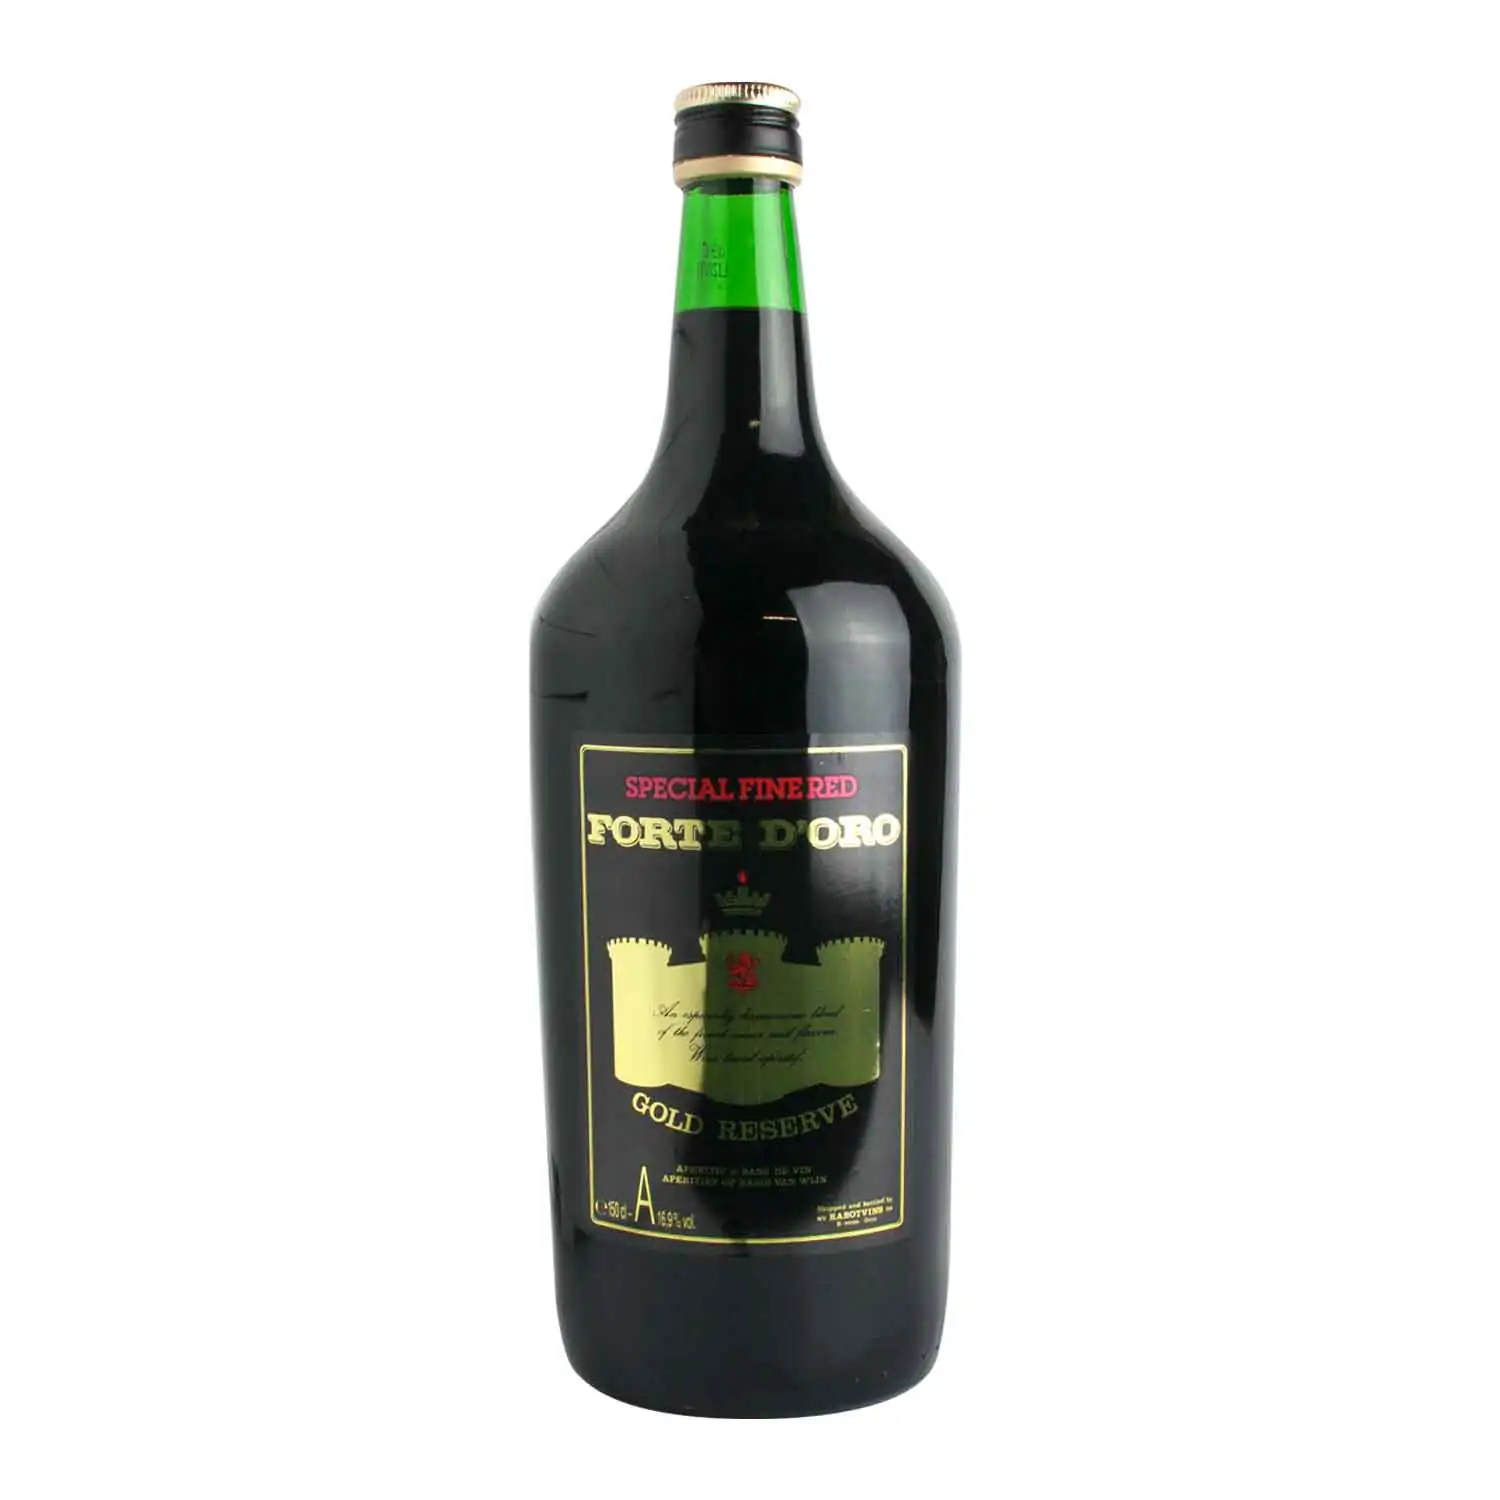 Forte d'Oro rouge 1,5l Alc 16,9% - Buy at Real Tobacco